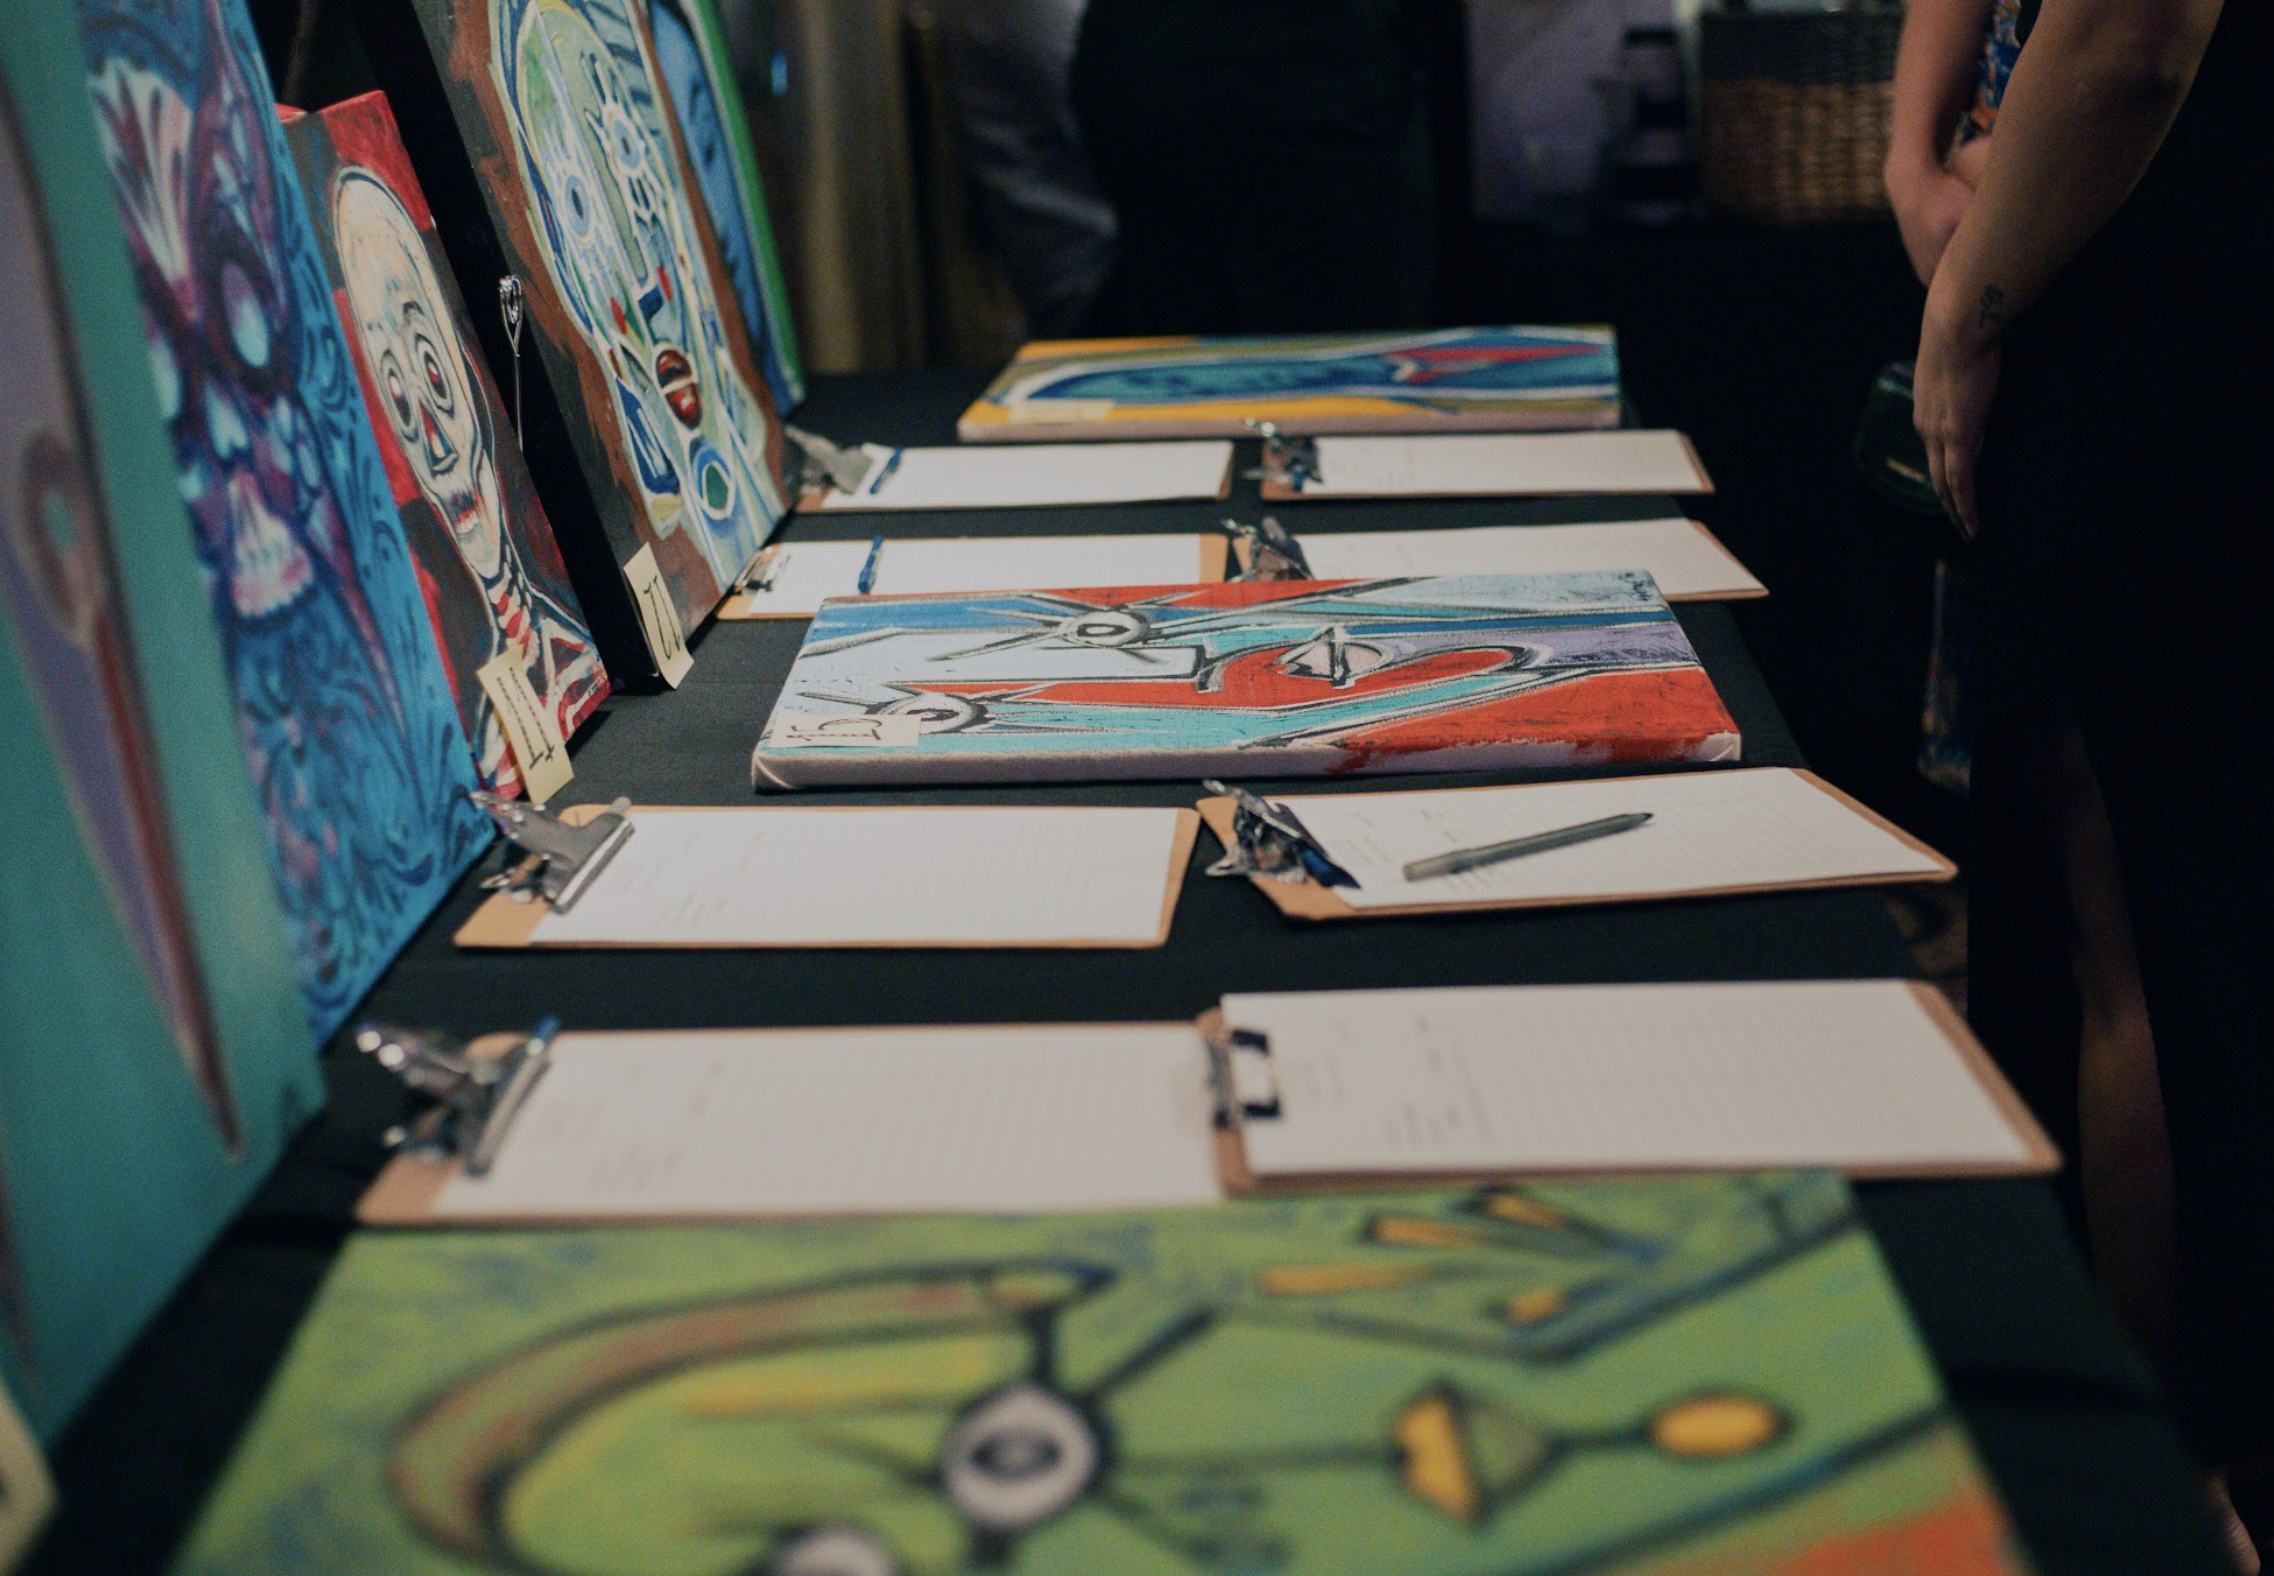   Paintings created by youths listed for a silent auction.   